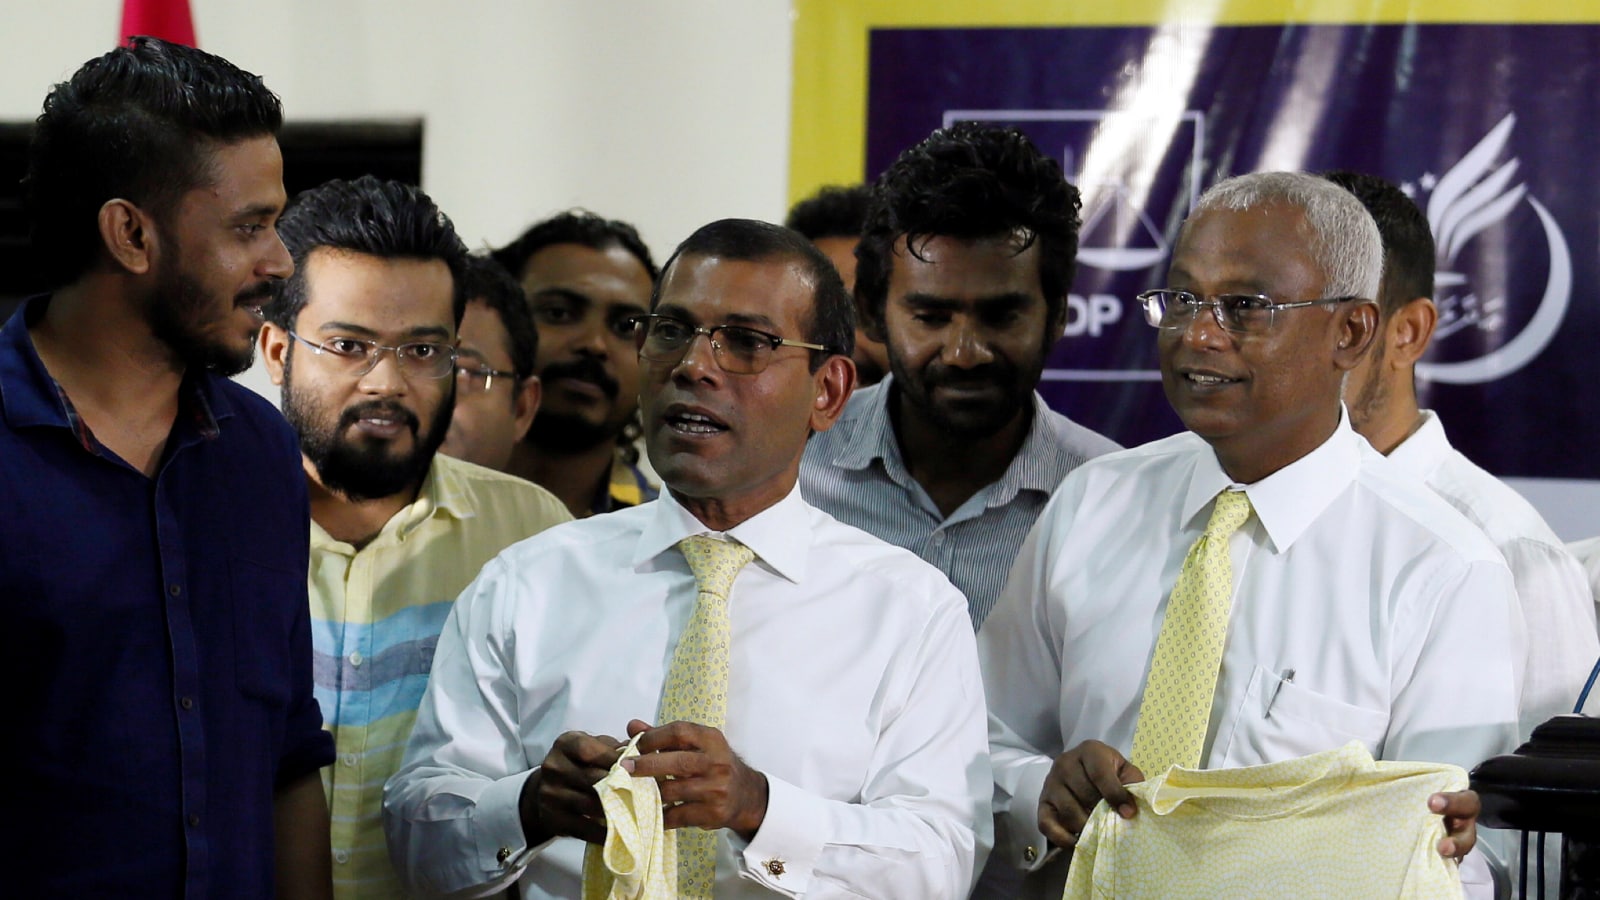 Maldives’ Ex-Prez Nasheed Faces Flak From Own Citizens For Allowing Rajapaksas In Male